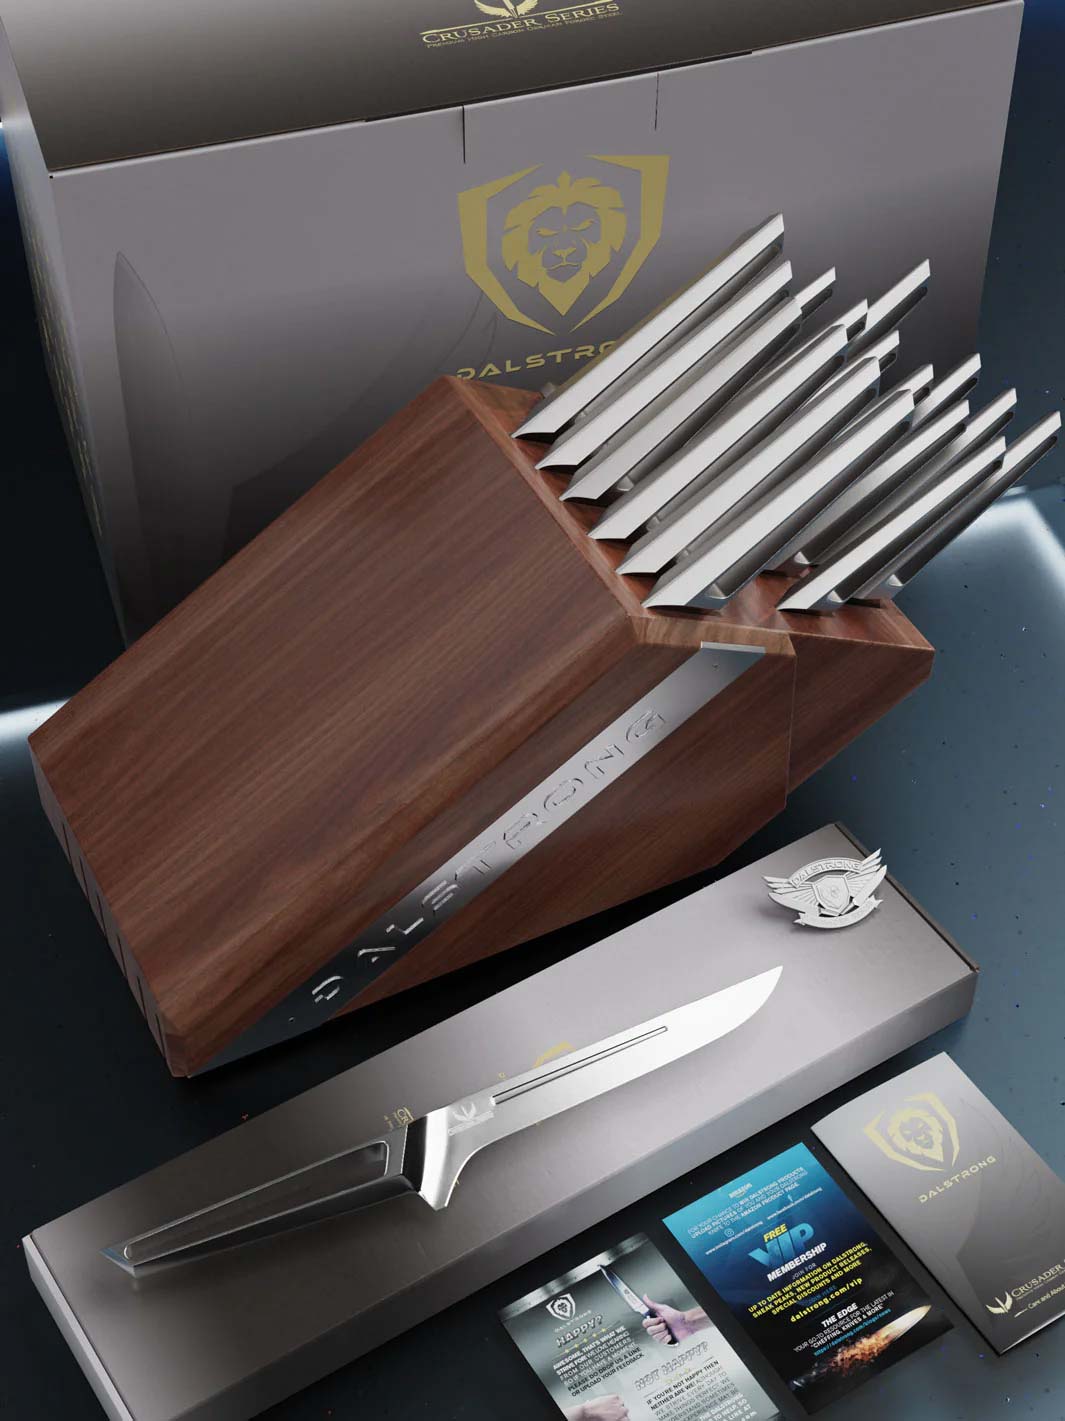 Dalstrong Knife Block Set - 8 Piece - Crusader Series - Forged High-Carbon  German Stainless Steel - Manchurian Ash